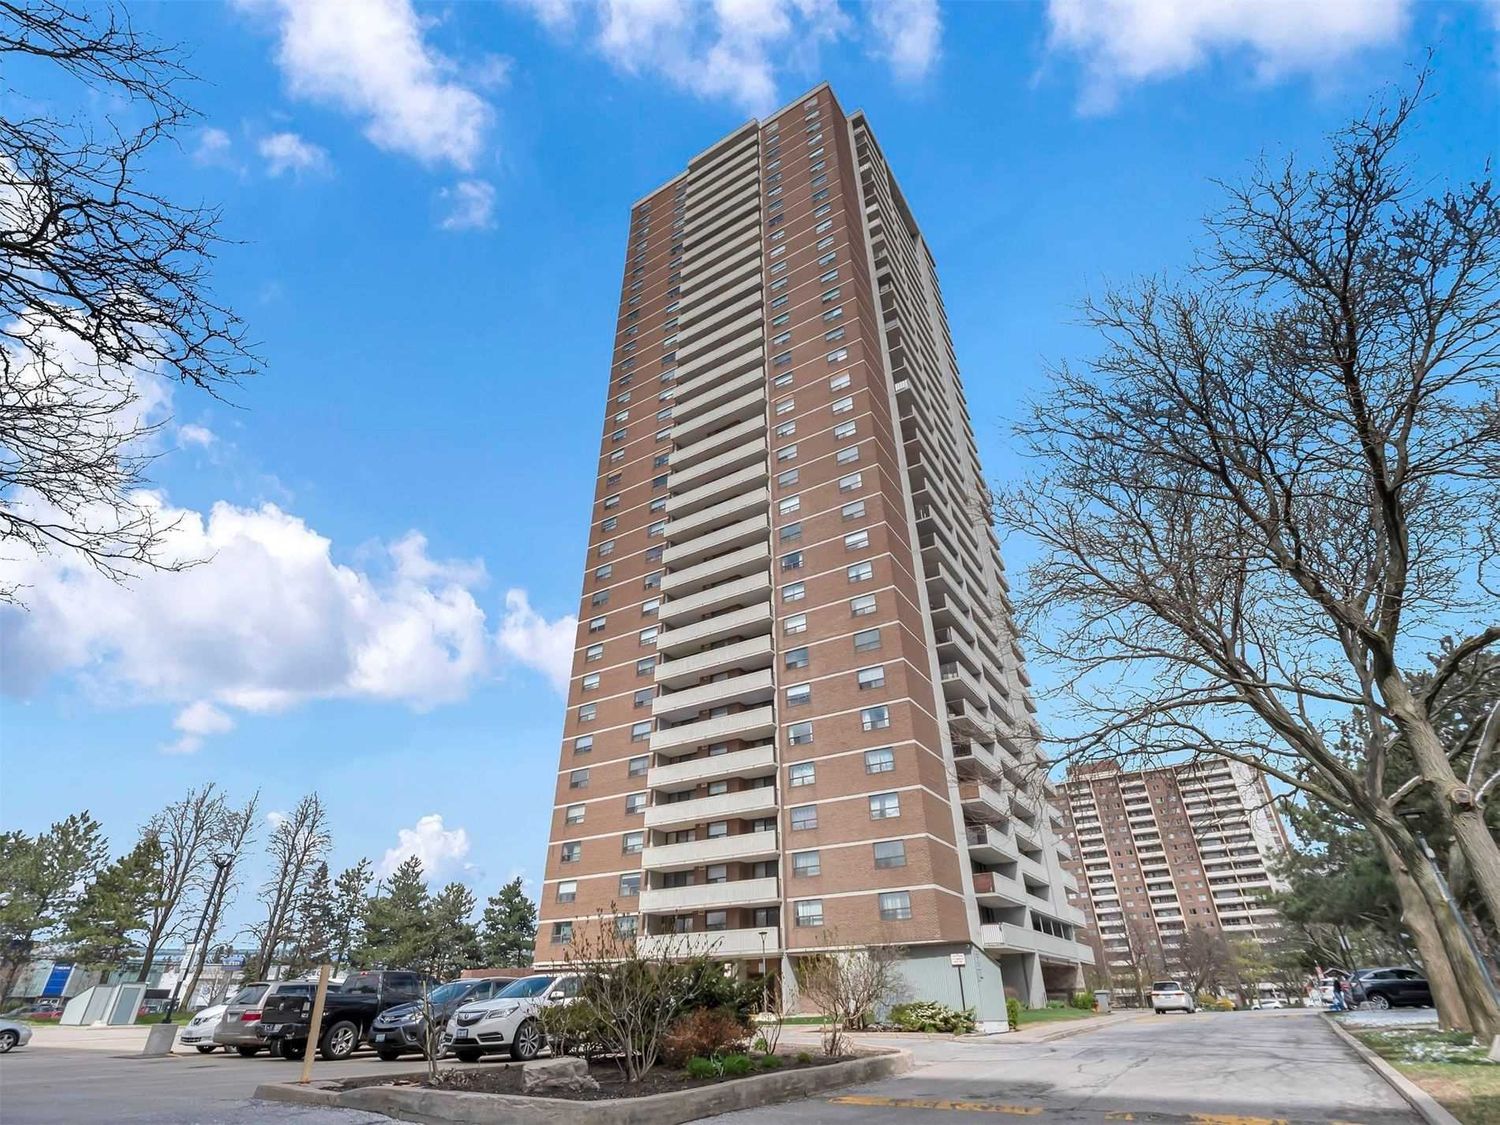 10 Tangreen Court. Carrington Tower Condos is located in  North York, Toronto